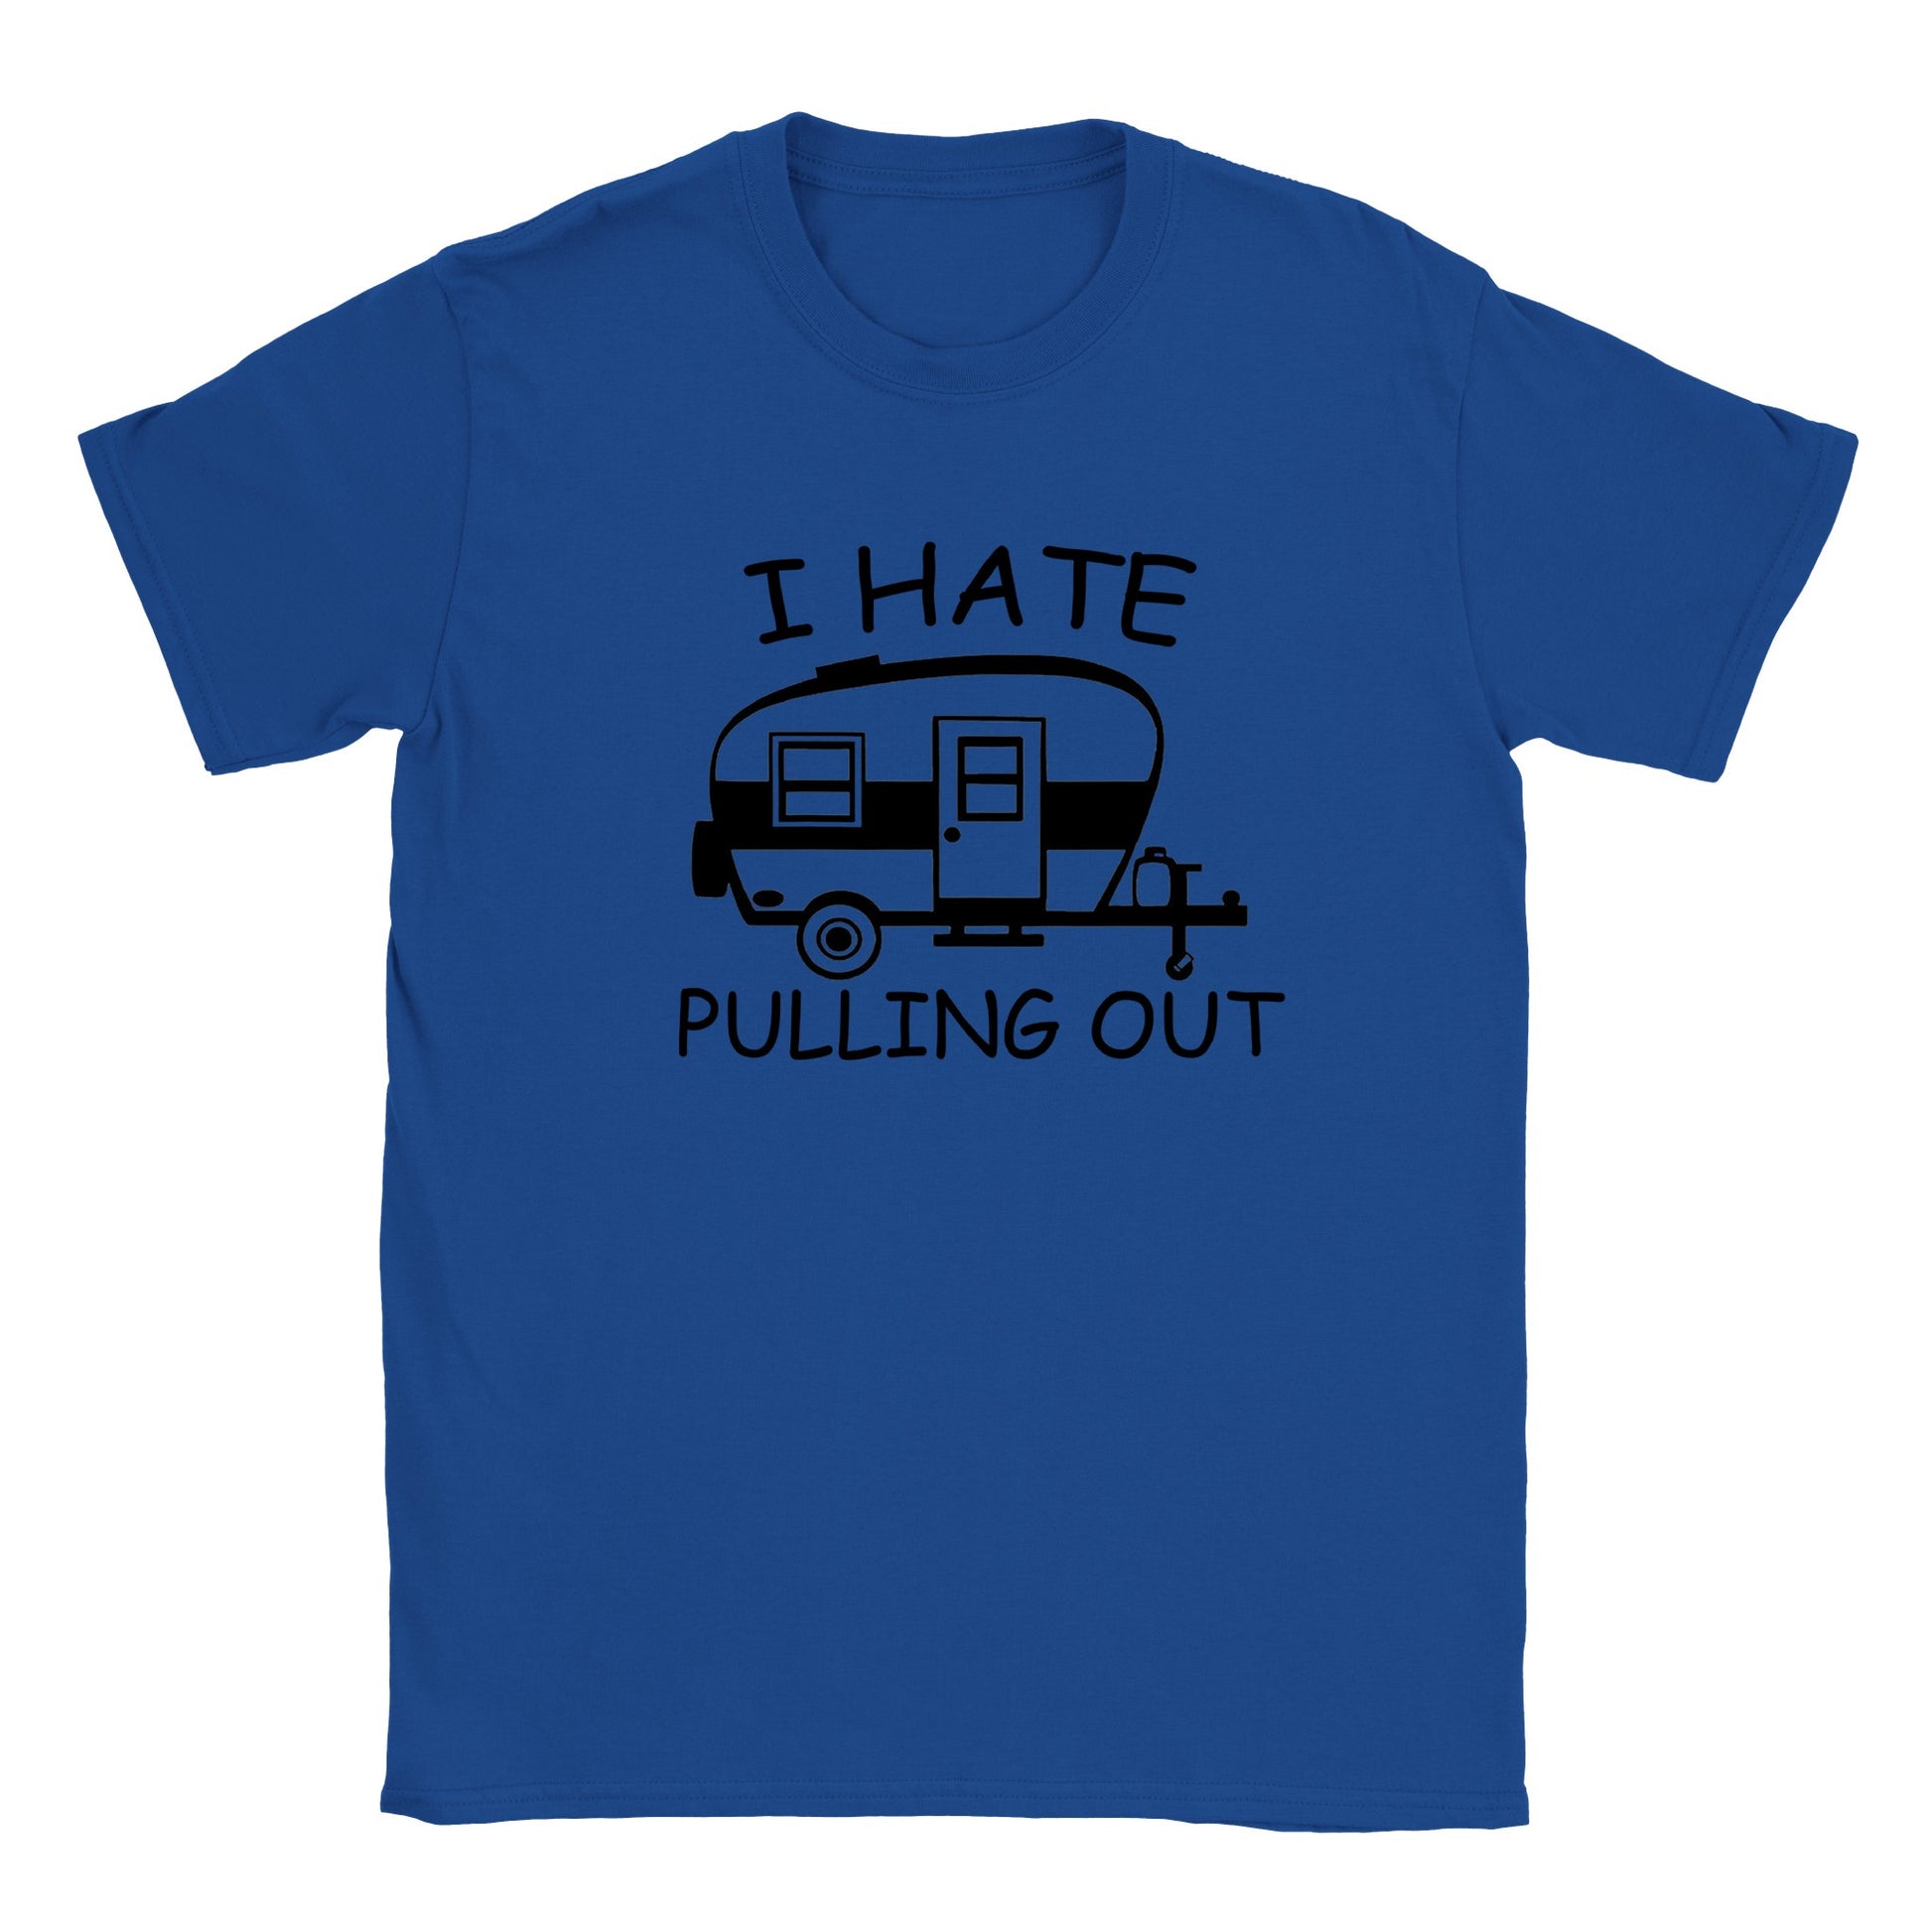 I Hate Pulling Out - Camping - Classic Unisex Crewneck T-shirt - Mister Snarky's